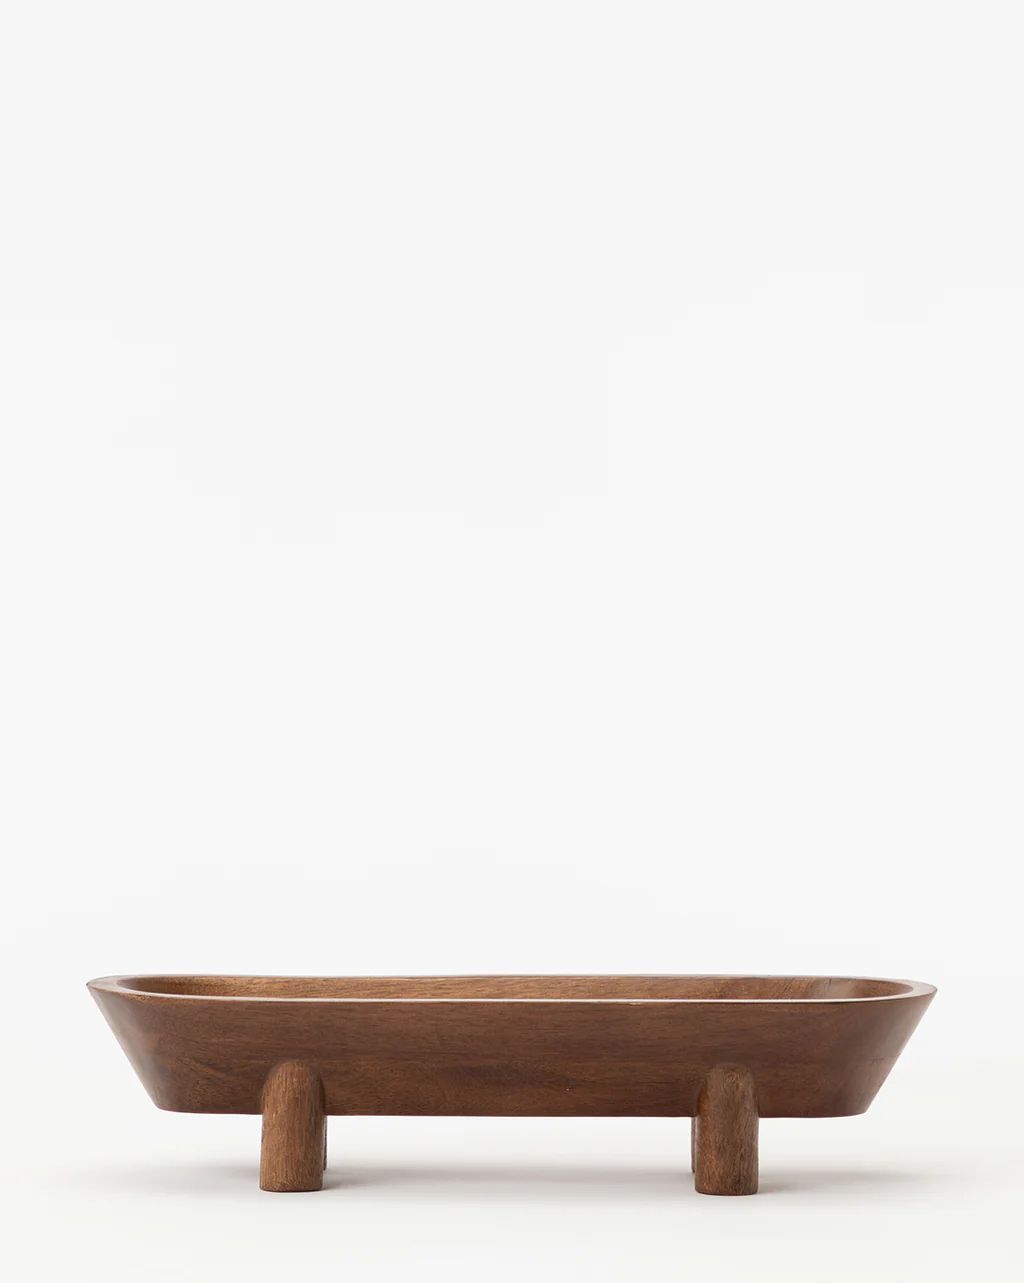 Wooden Footed Tray | McGee & Co.